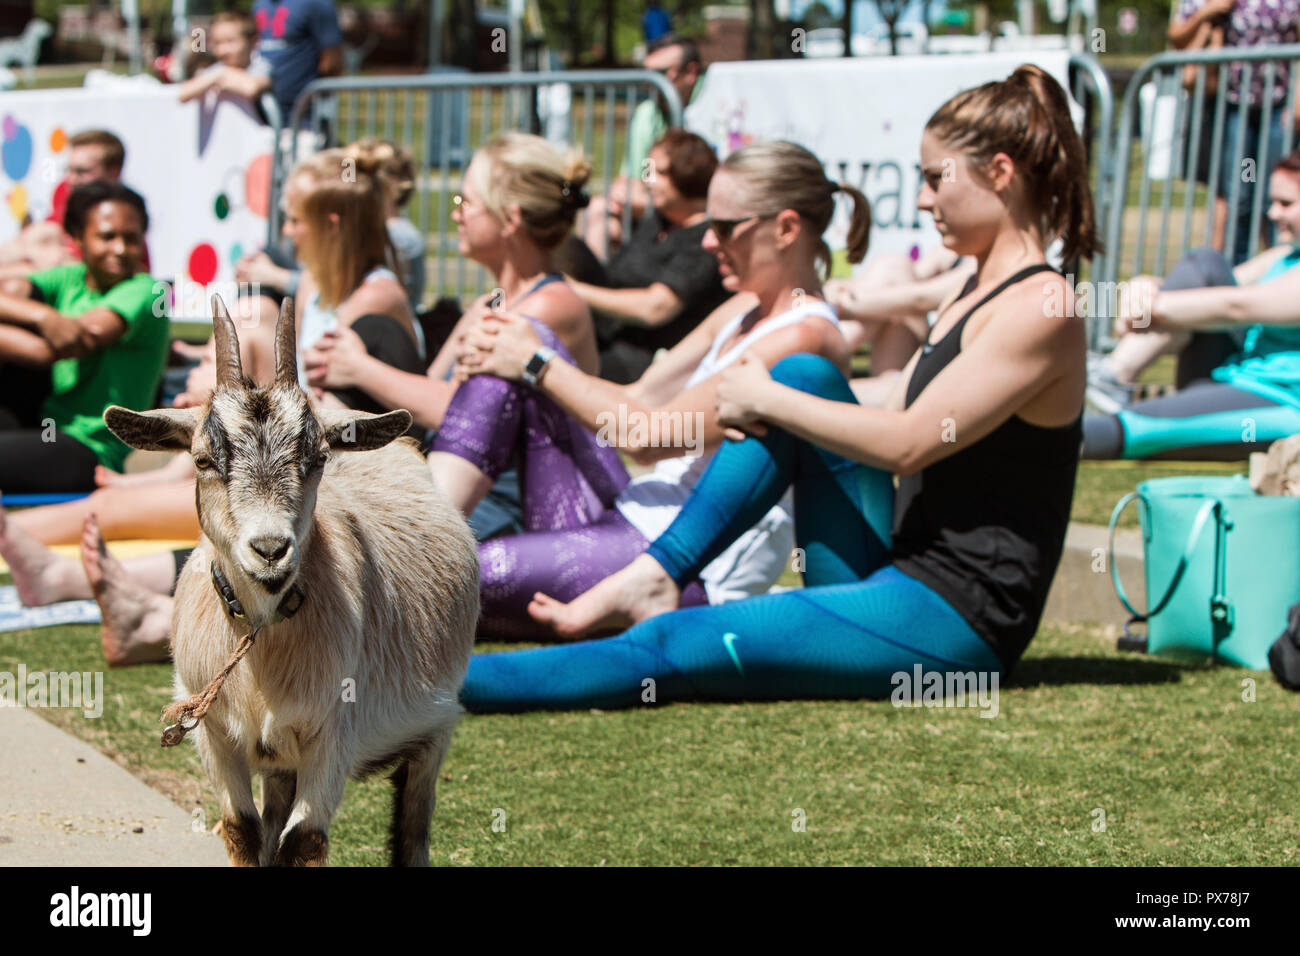 Suwanee, GA, USA - April 29, 2018:  A goat stands among women stretching in a goat yoga event at a public park on April 29, 2018 in Suwanee, GA. Stock Photo